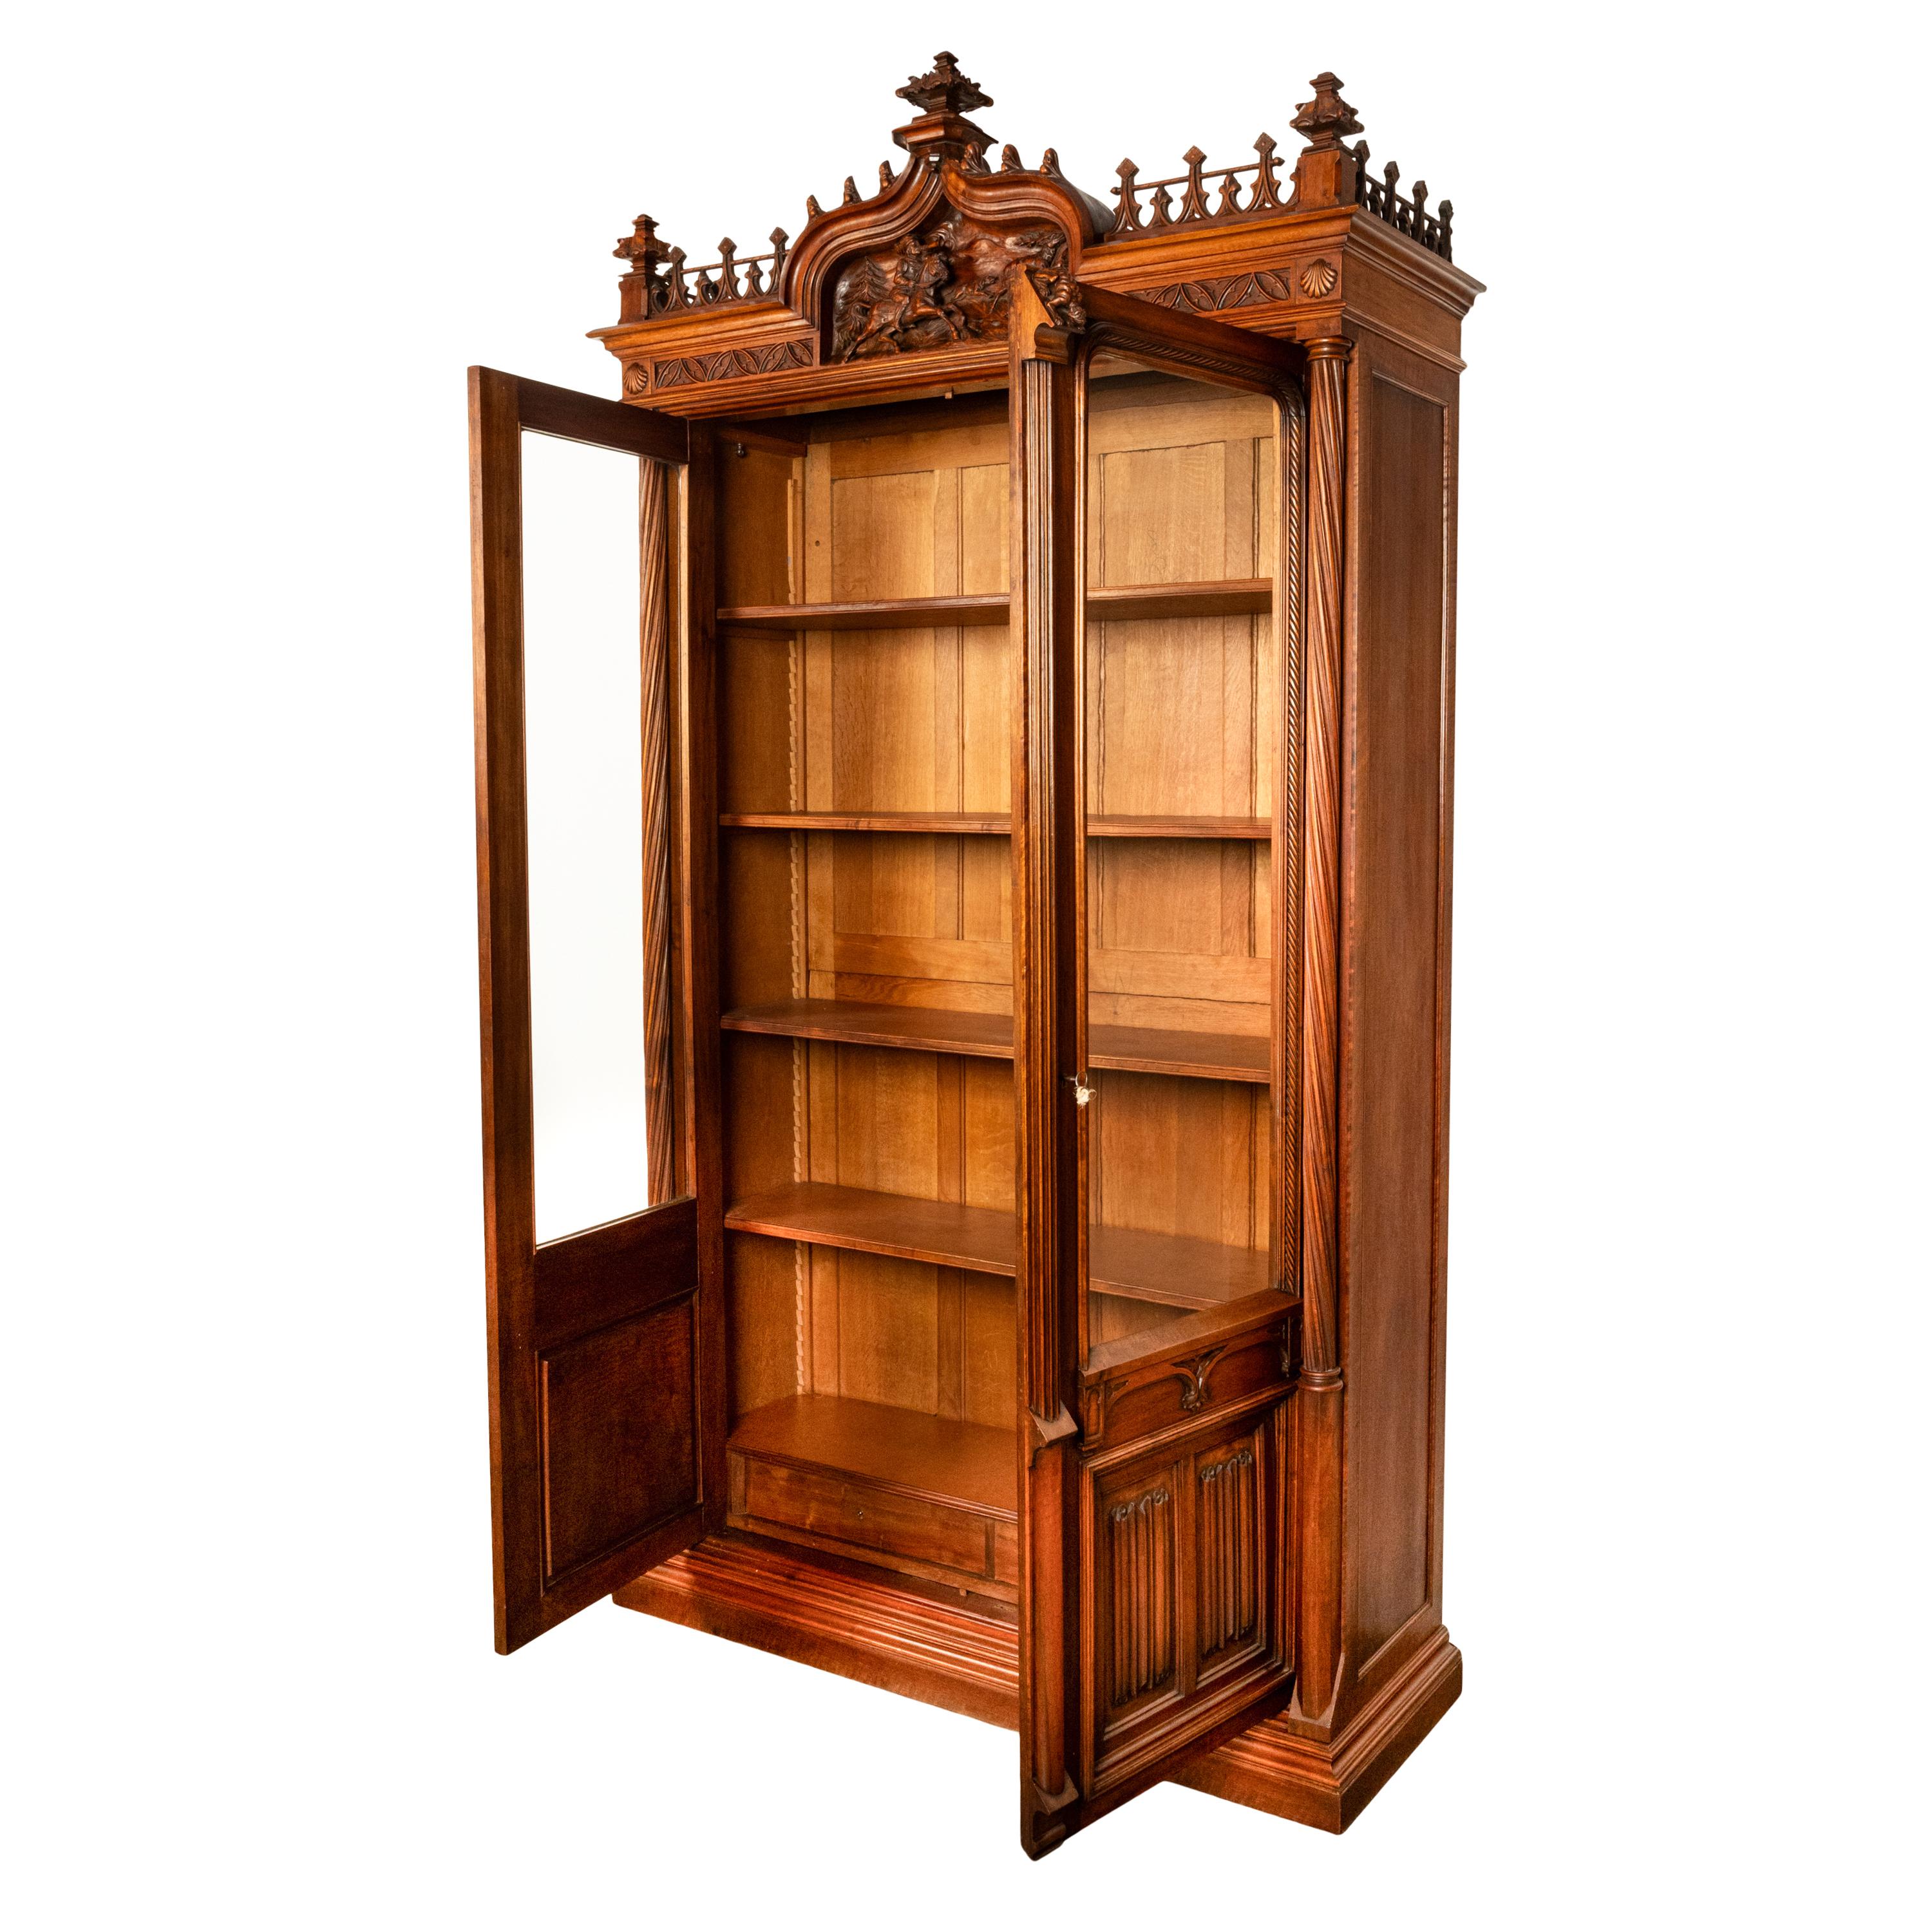 Antique French Carved Oak Gothic Revival Library Bookcase Bibliotheque 1880 For Sale 1